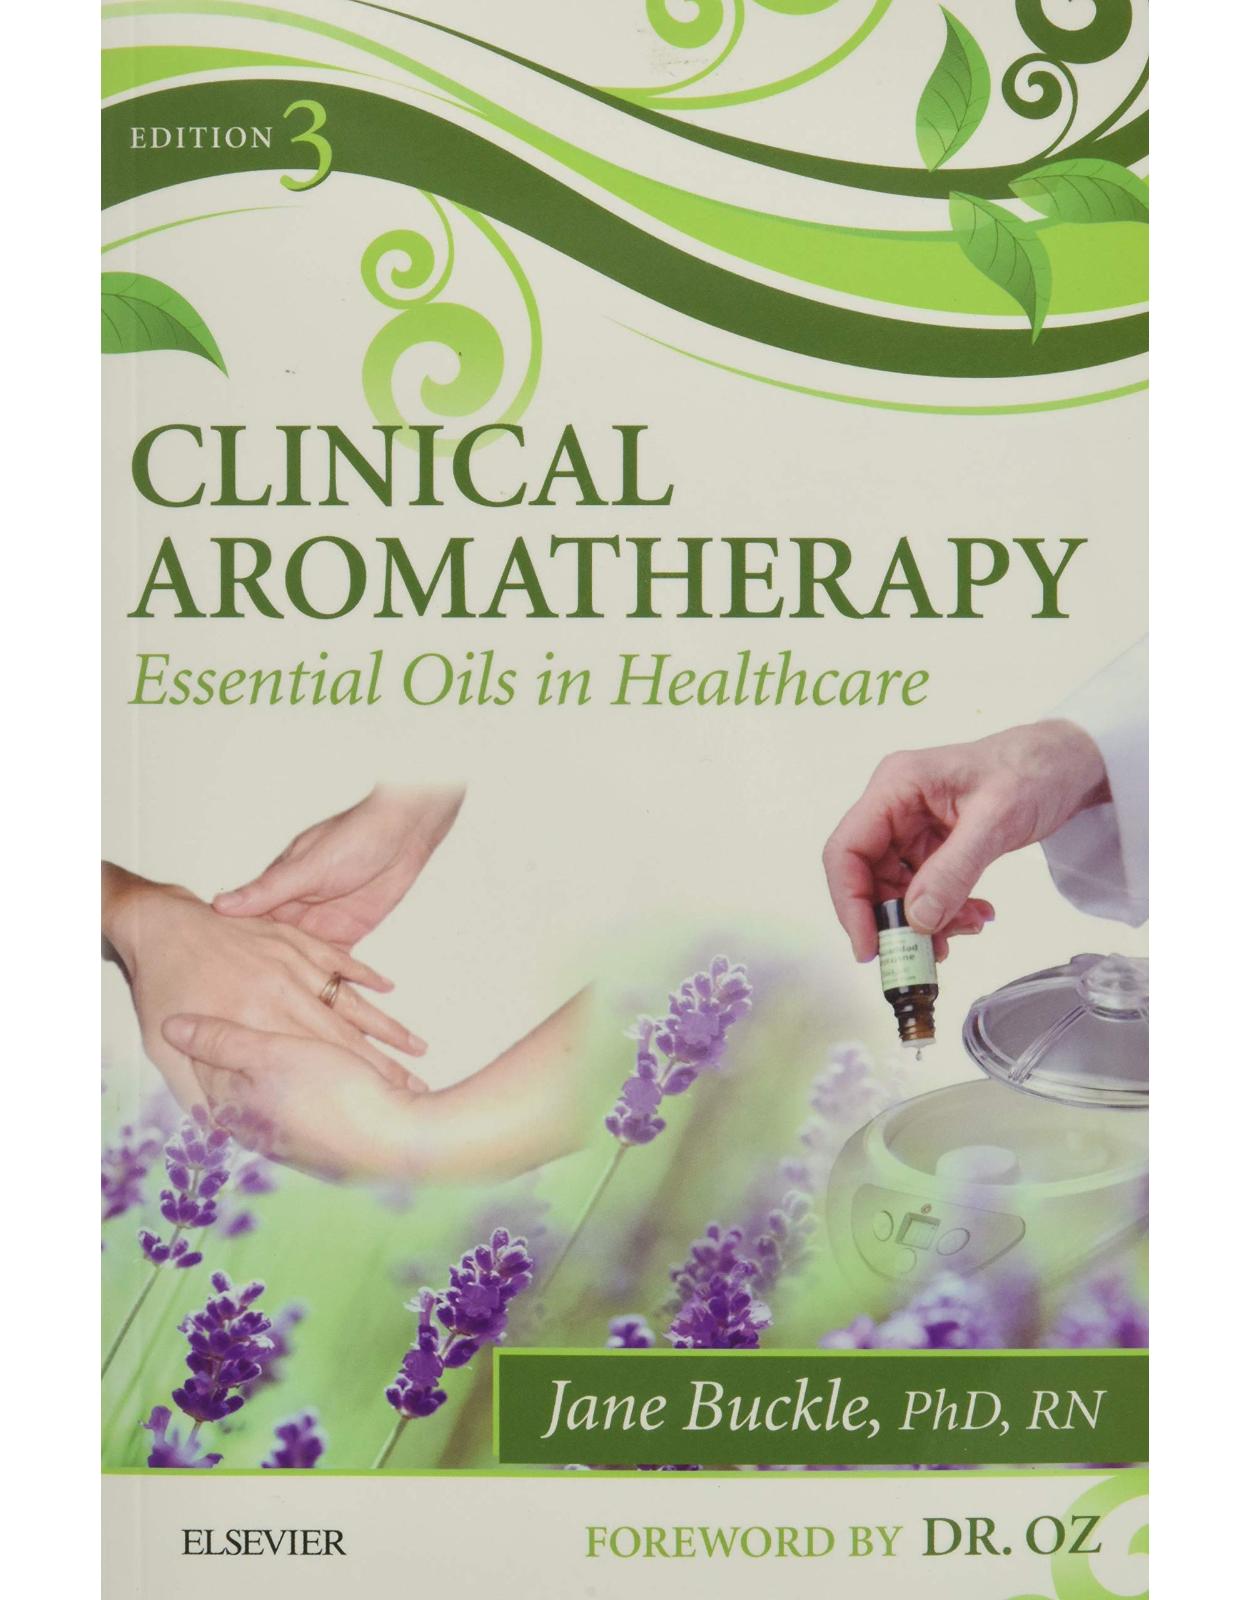 Clinical Aromatherapy: Essential Oils in Healthcare, 3e